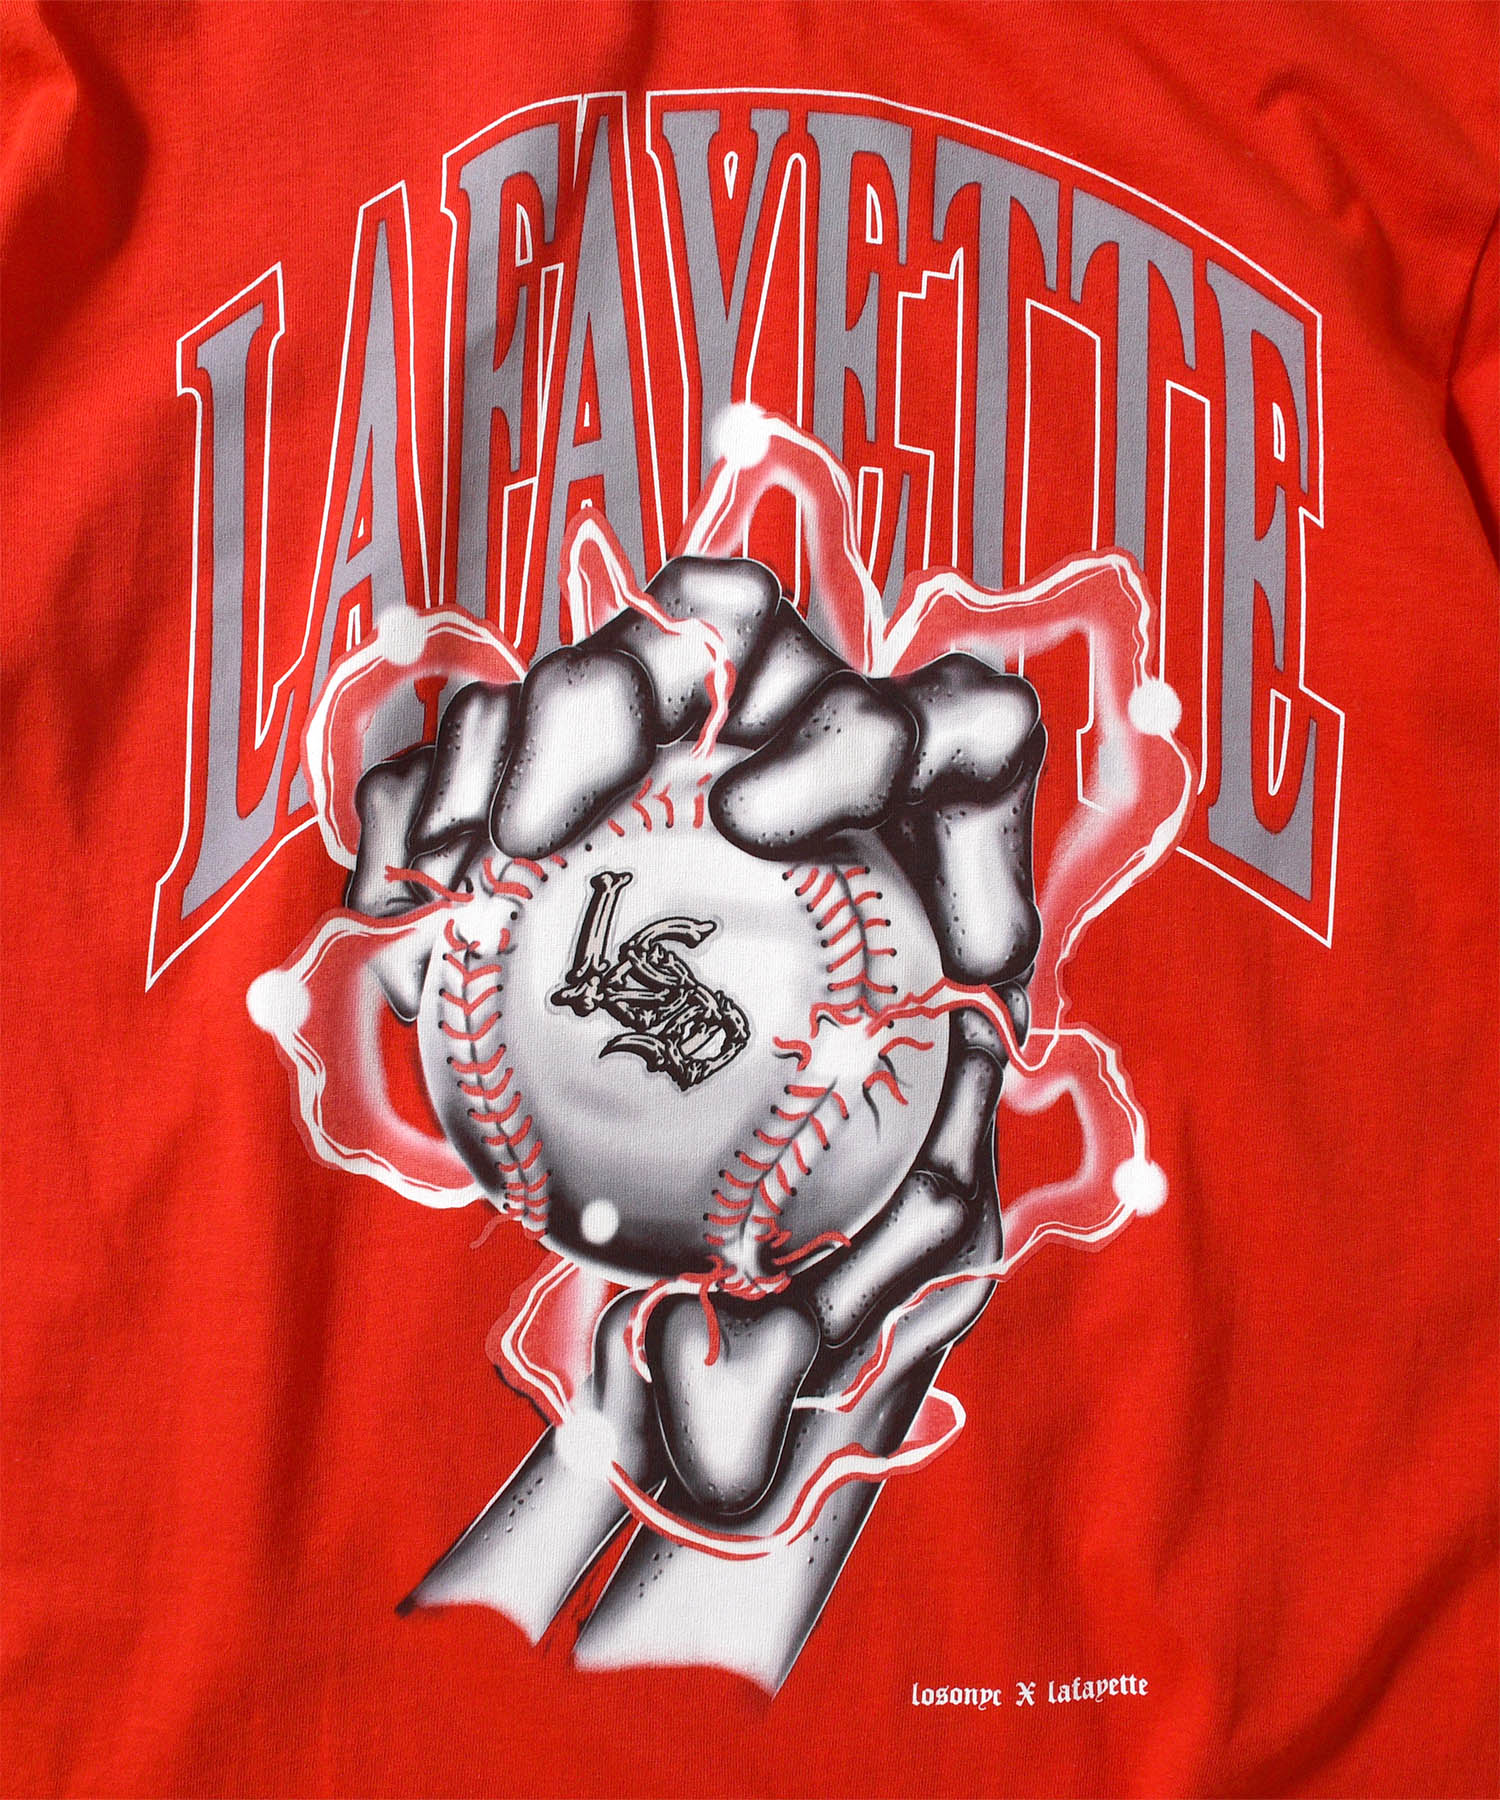 LFYT × LOSO TEE LE220104 RED